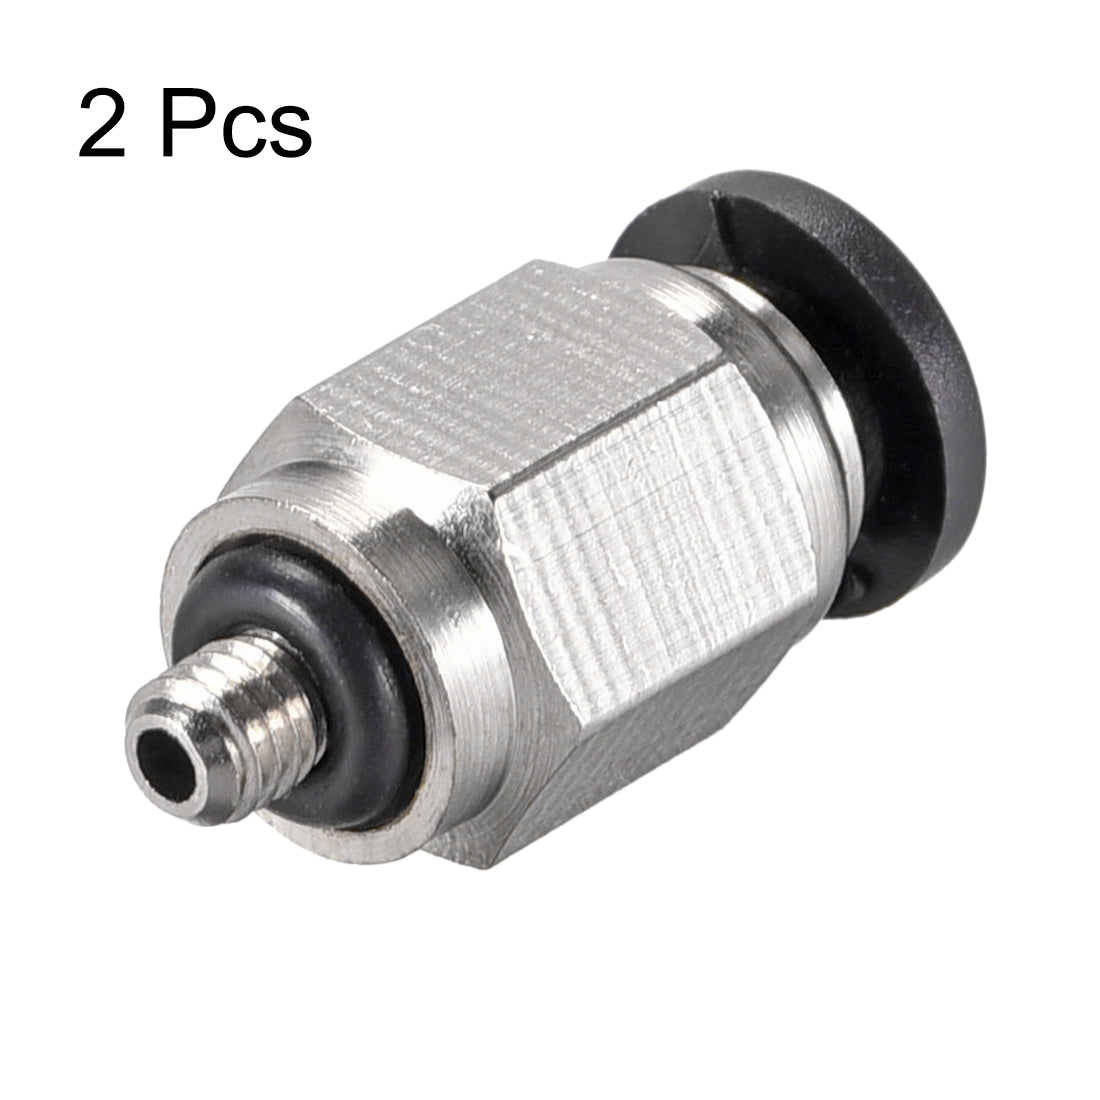 uxcell Uxcell Straight Pneumatic Push to Quick Connect Fittings M3 Male x 4mm Tube OD Silver Tone 2pcs